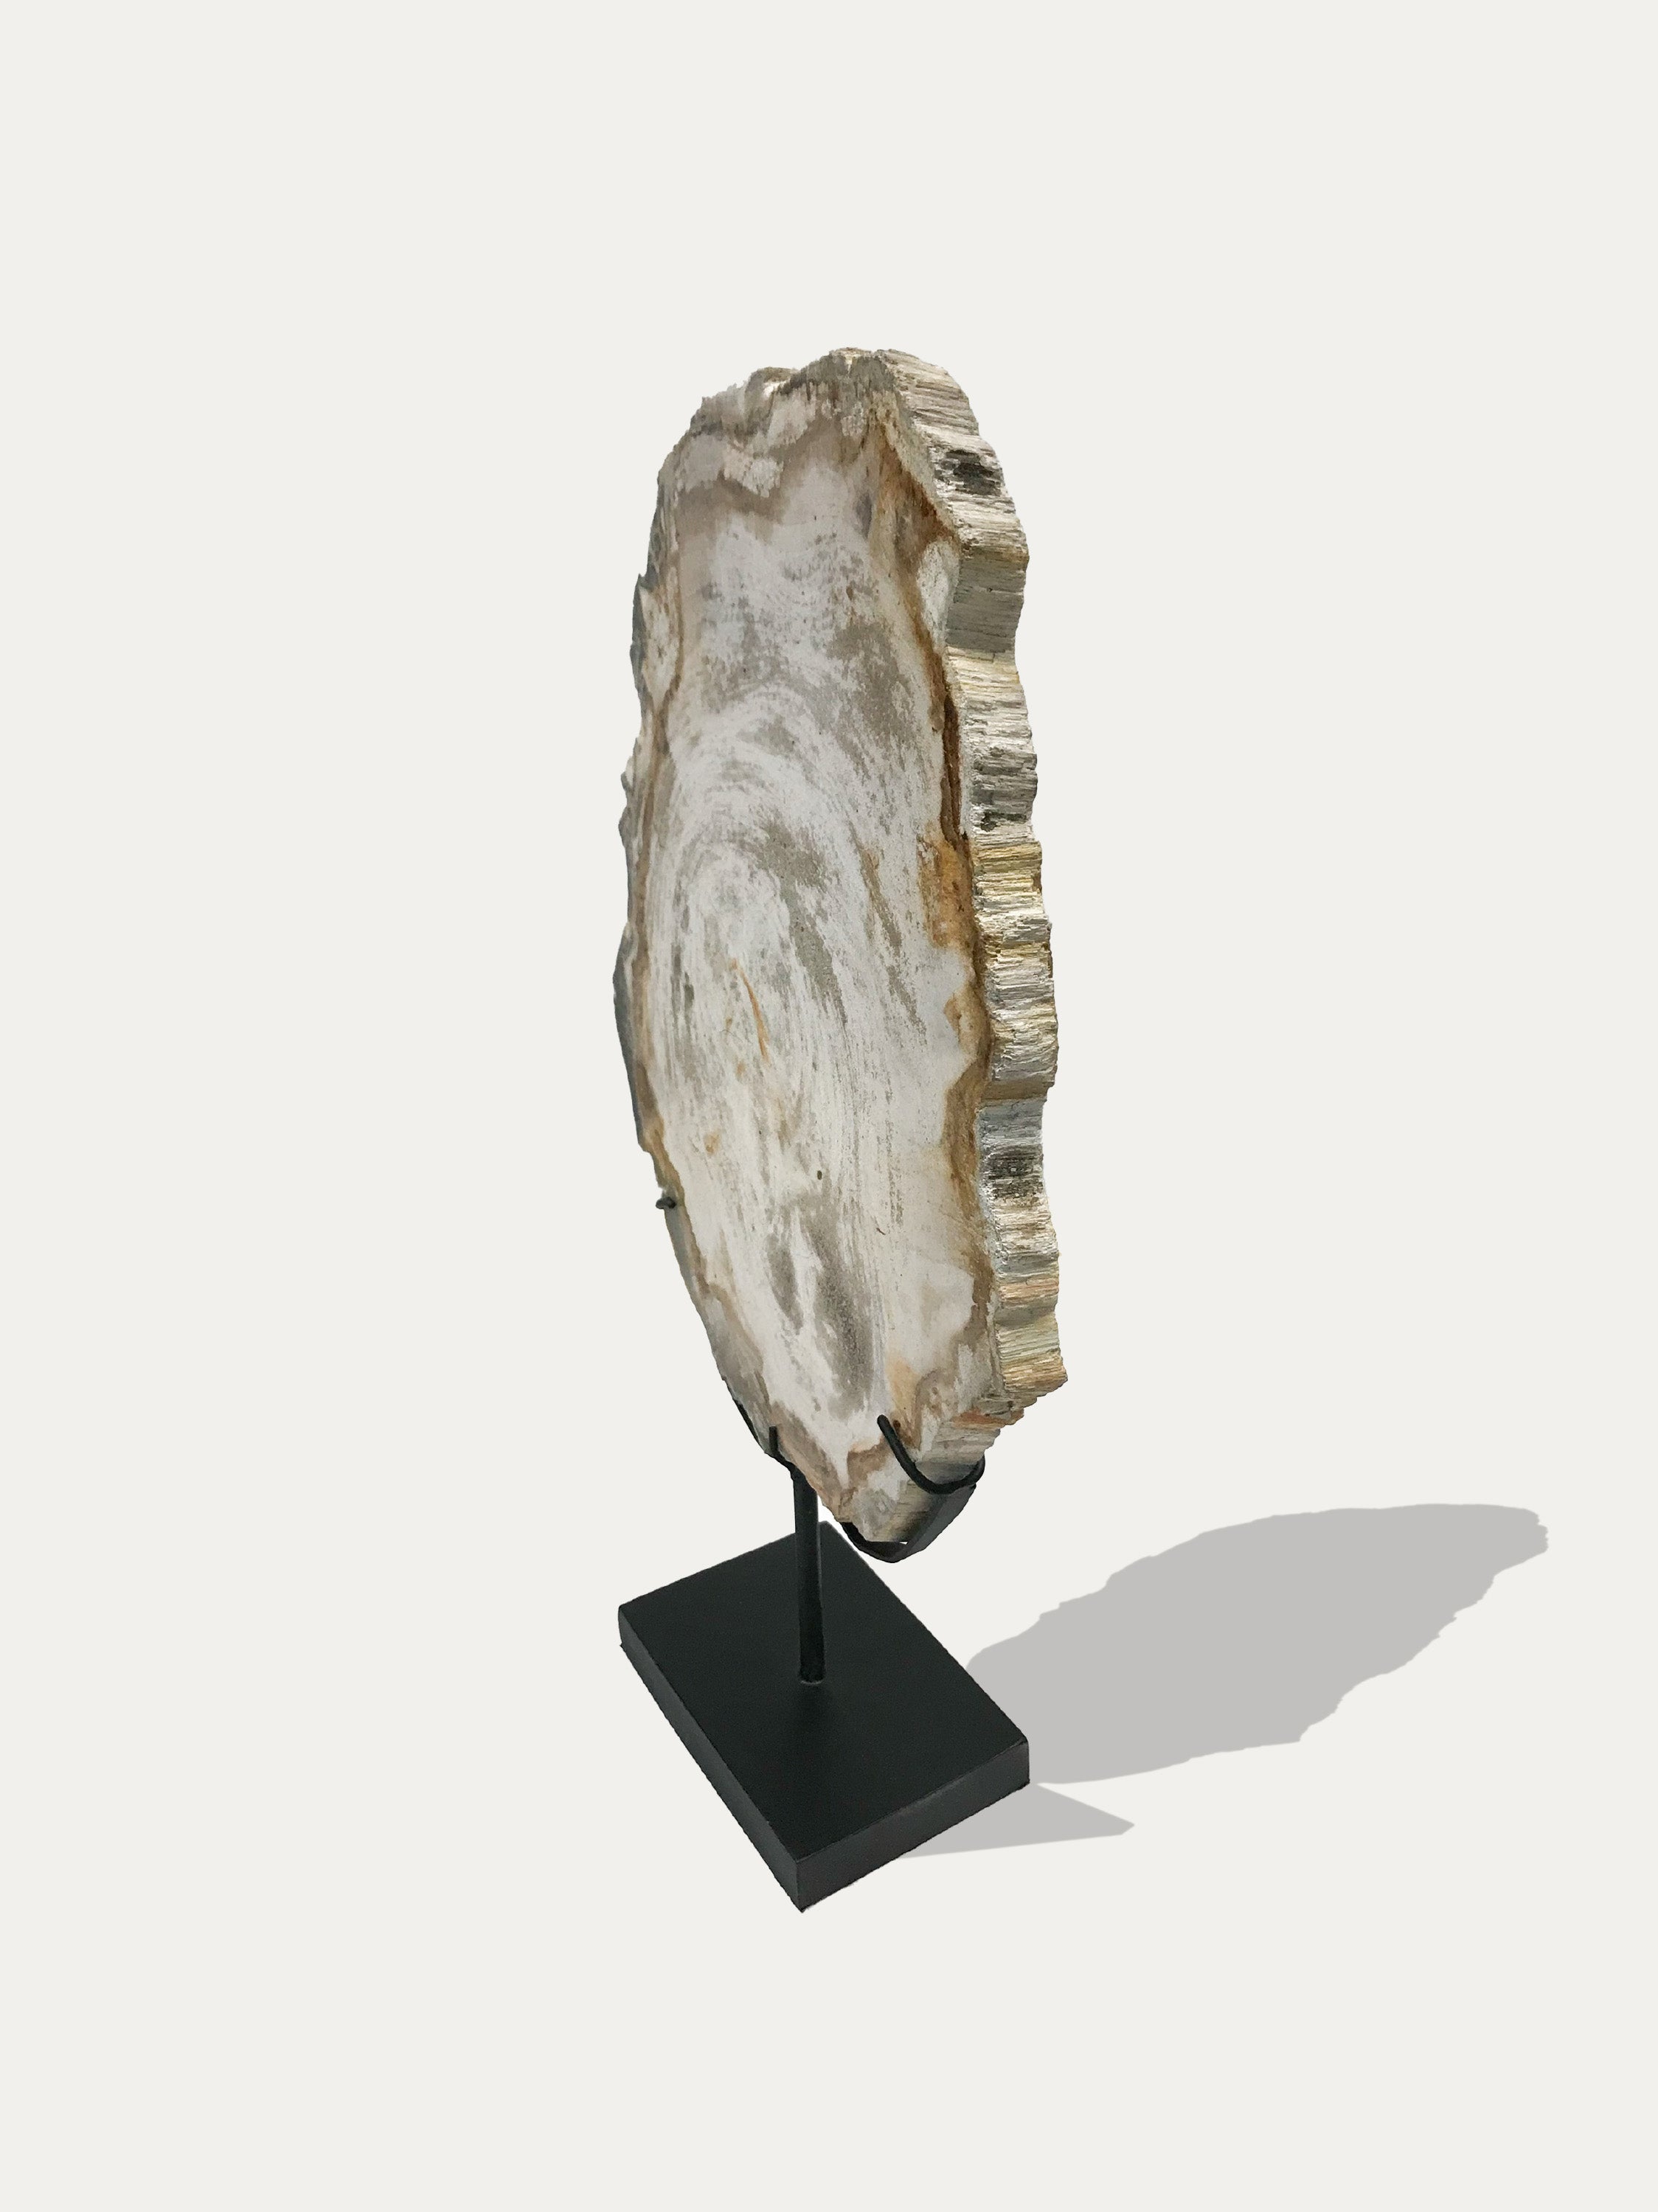 Petrified Wood Sculpture and Tray - Asian art from Kirschon